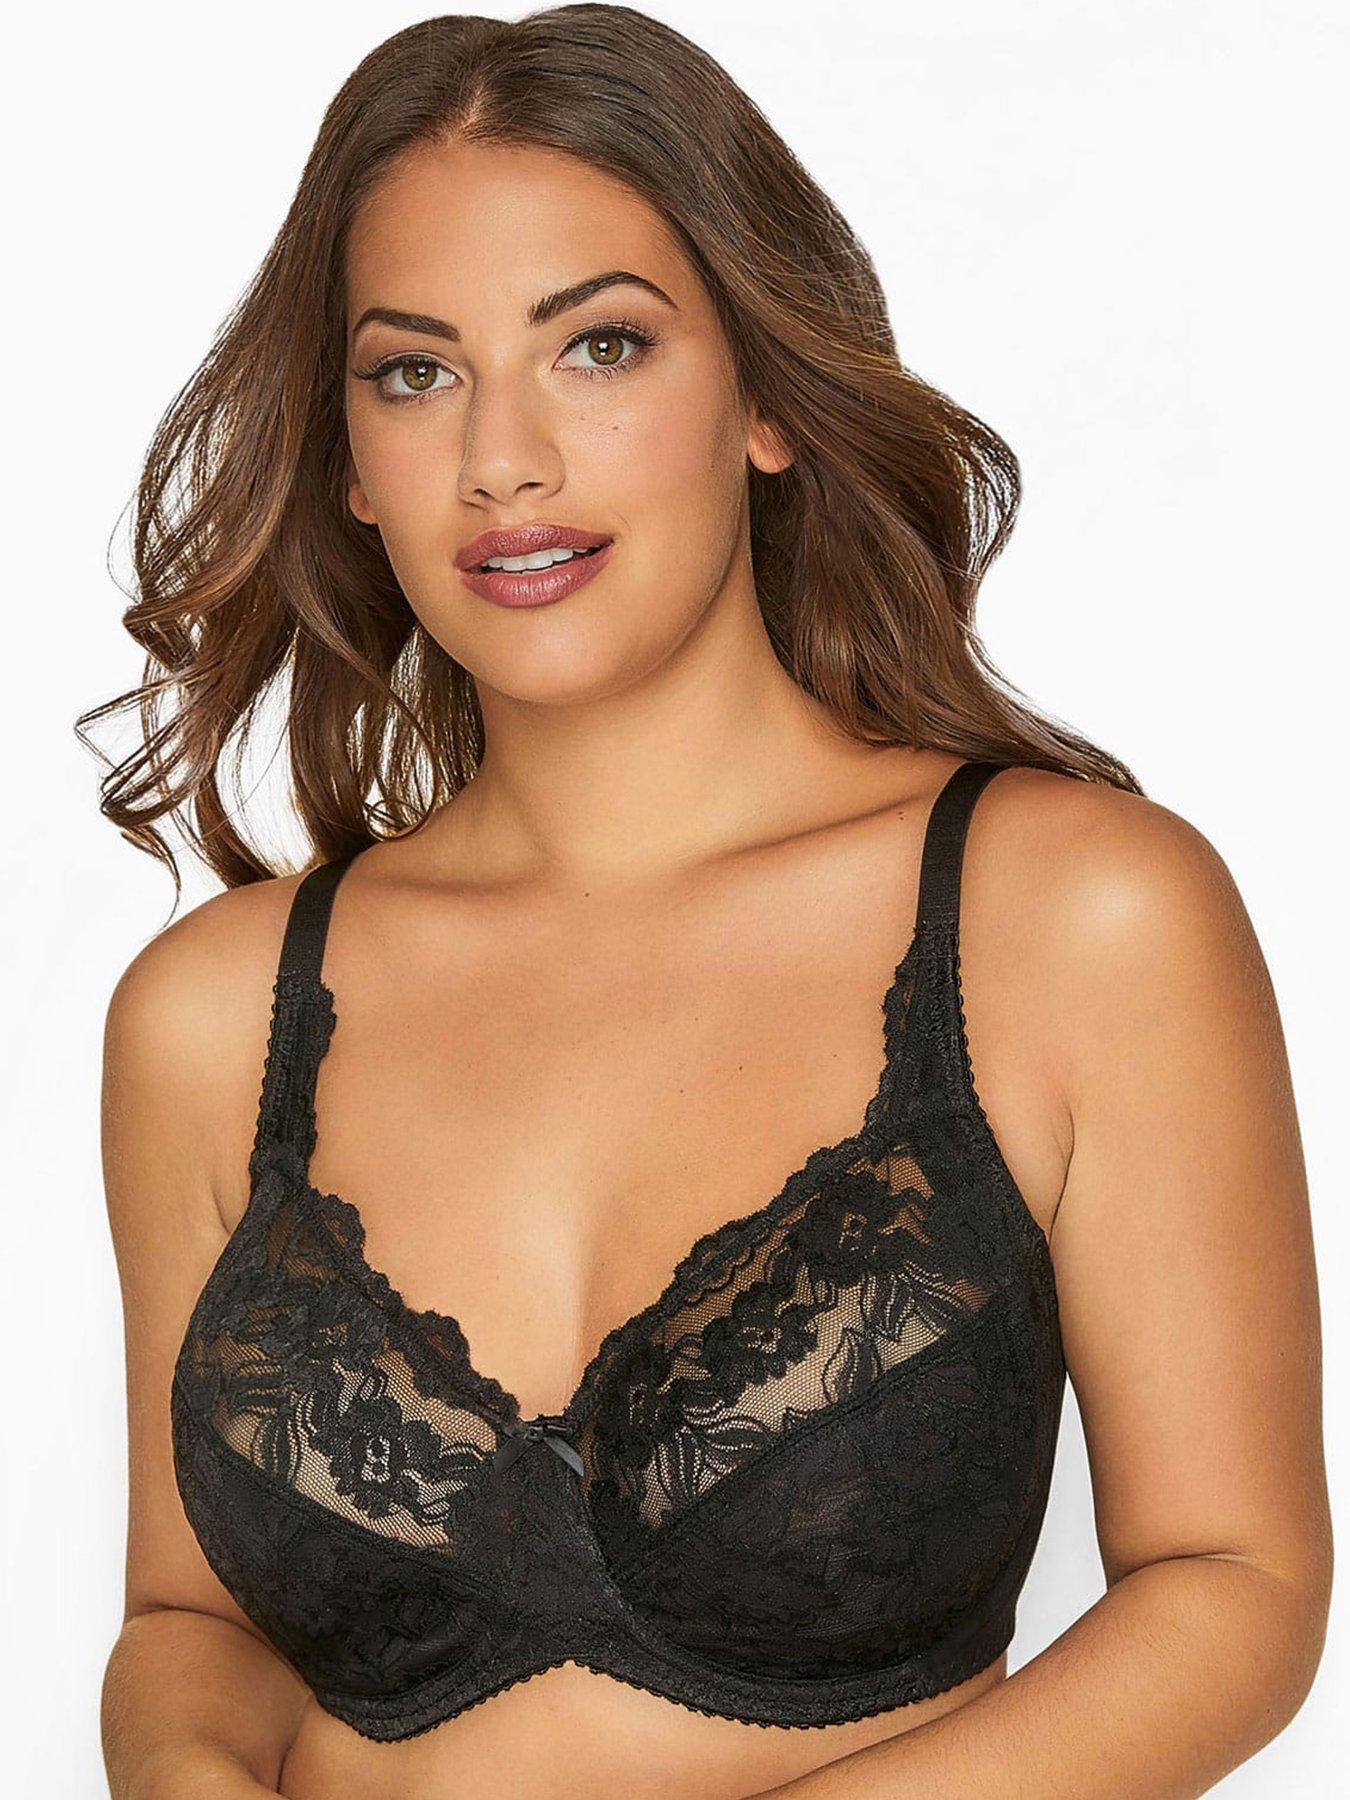 Underwired Black Lacy Bra Large Ladies Bosom Firm Hold Plus Size Full Cup UK